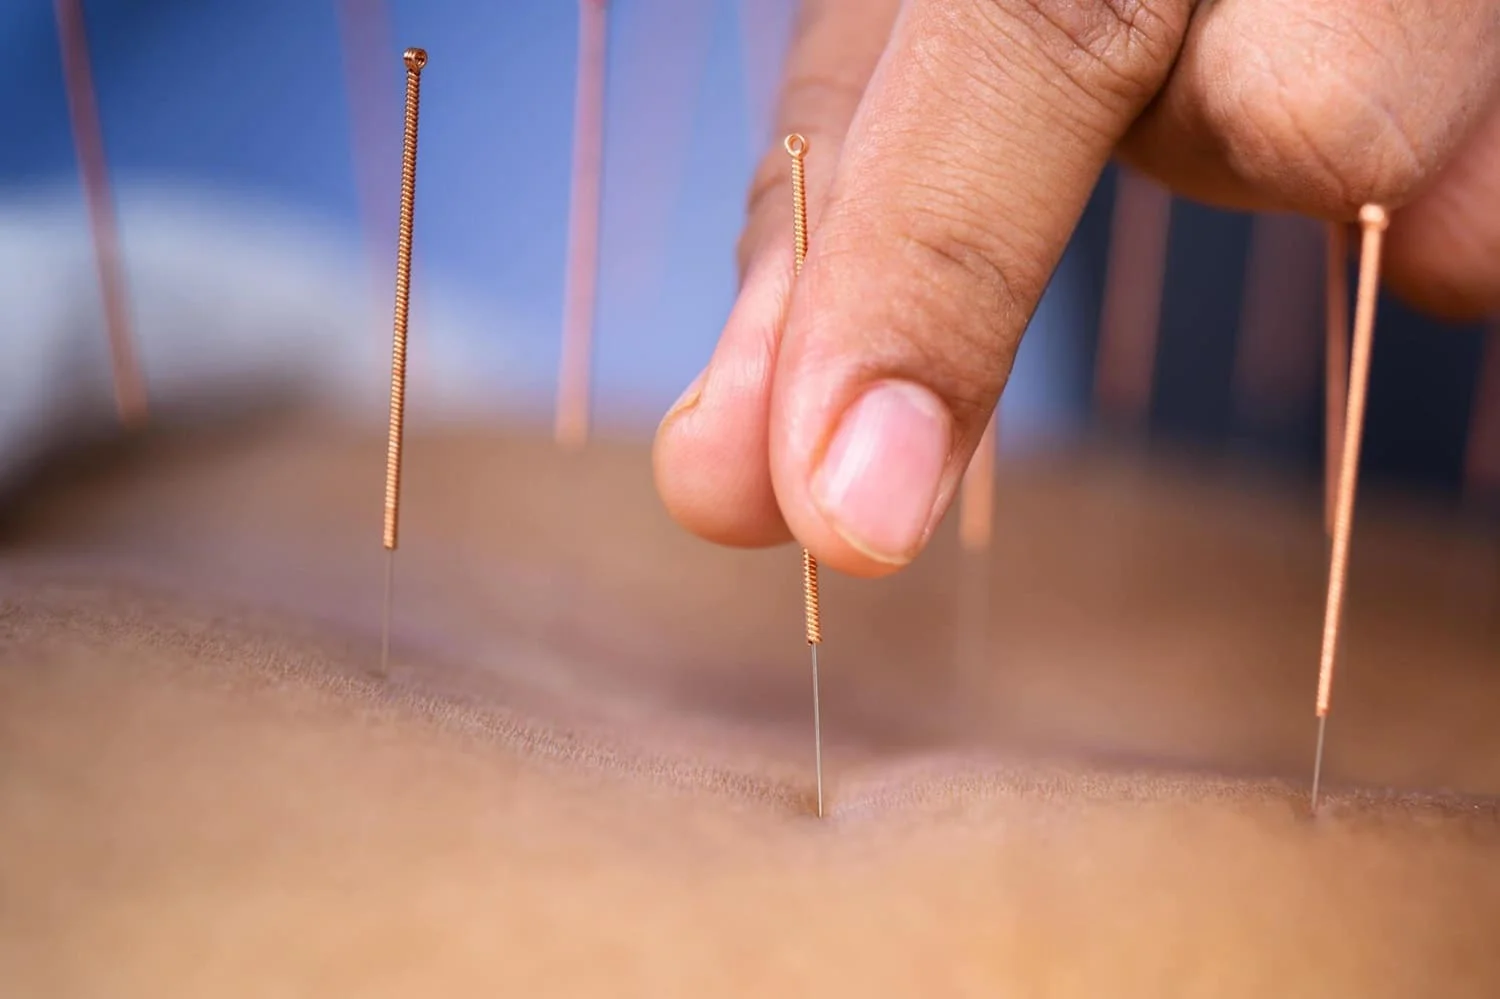 How does acupuncture help ED